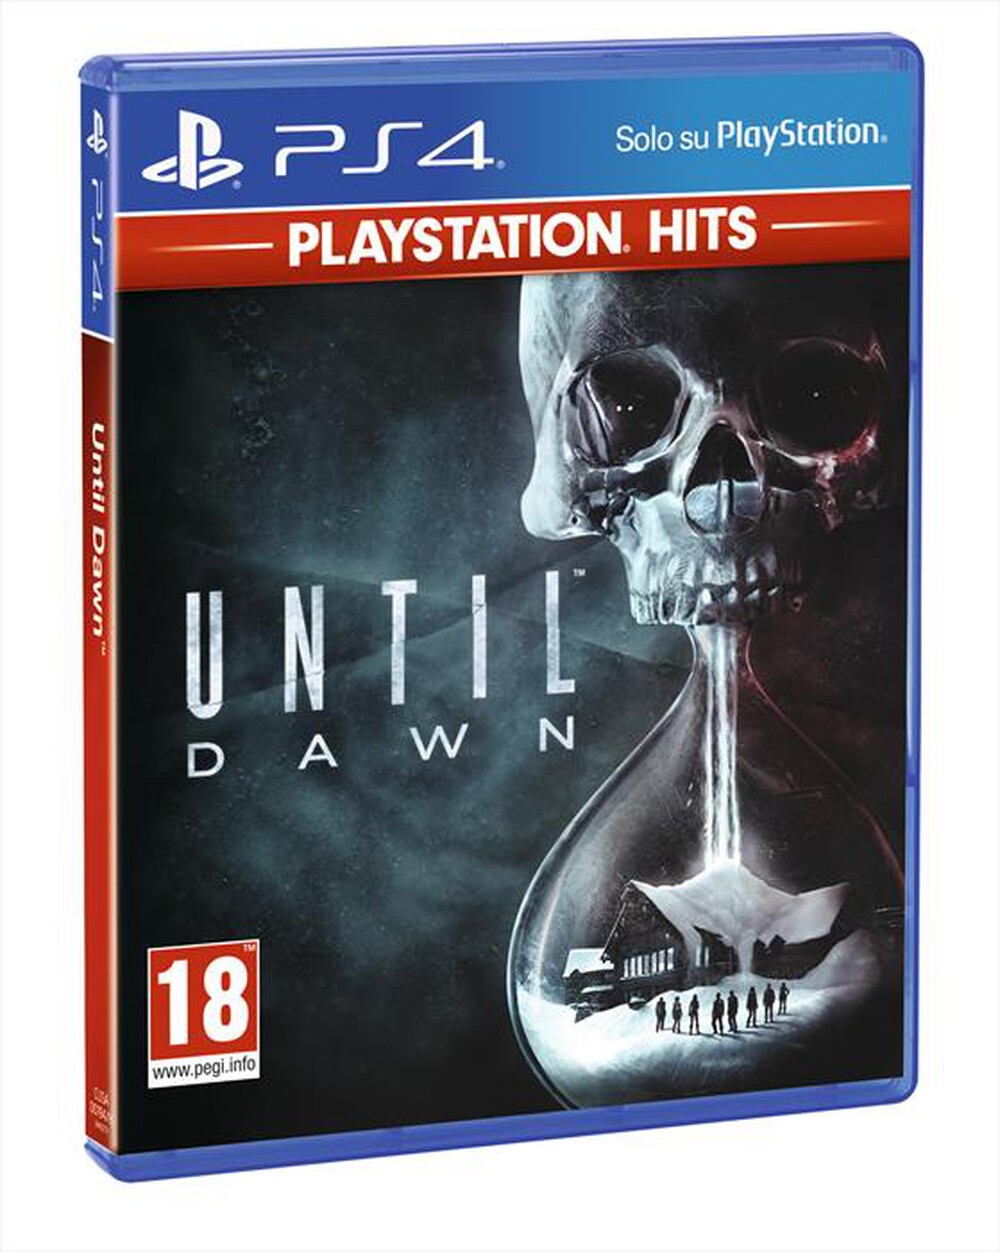 "SONY COMPUTER - UNTIL DAWN (PS4) PS HITS"